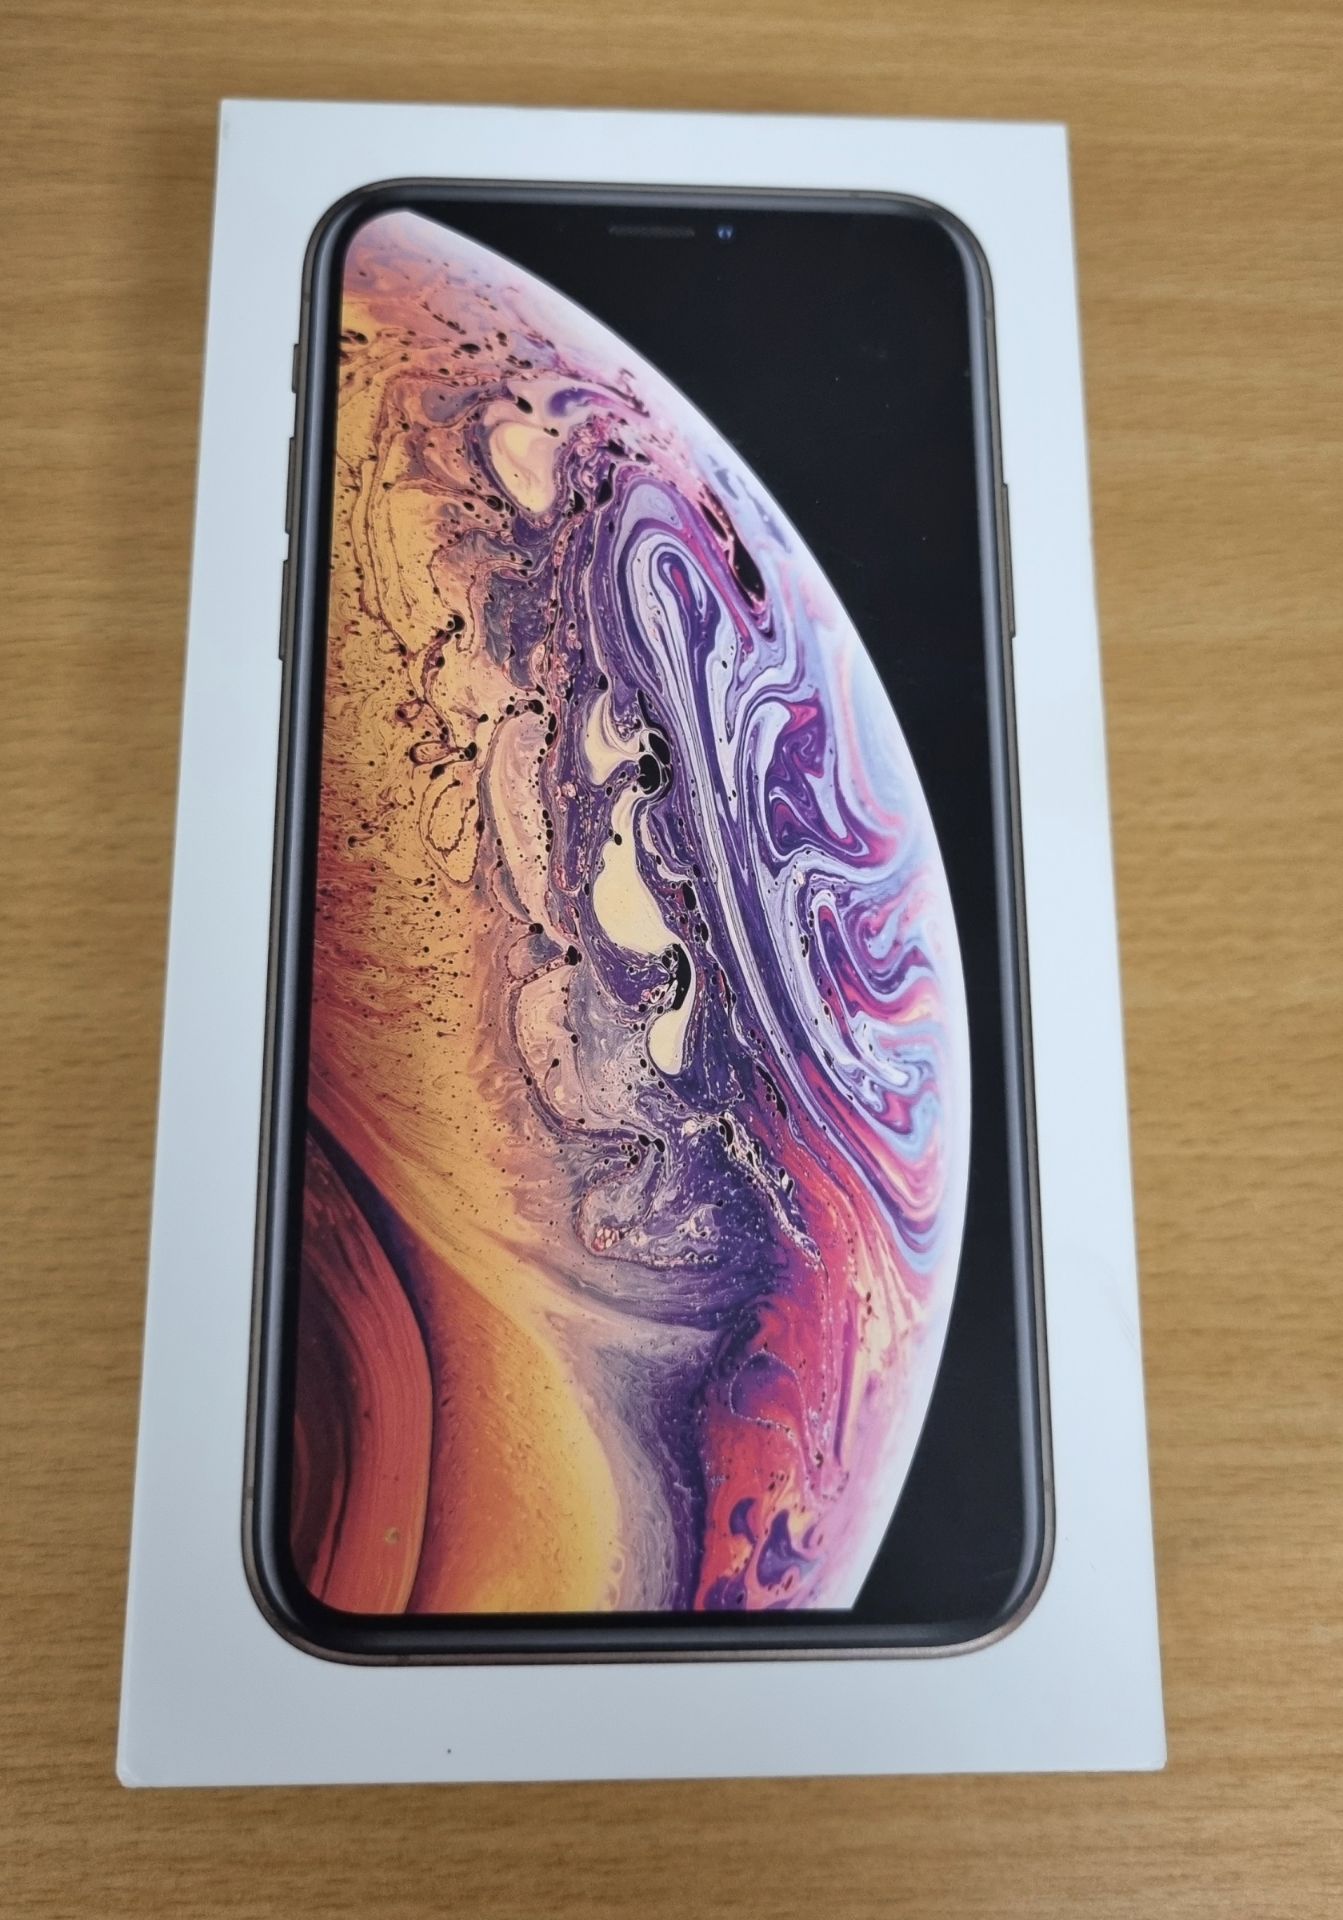 Apple iPhone XS (boxed) – Gold – 64GB – MT9G2B/A – Serial number G0NZG4AEKPG3